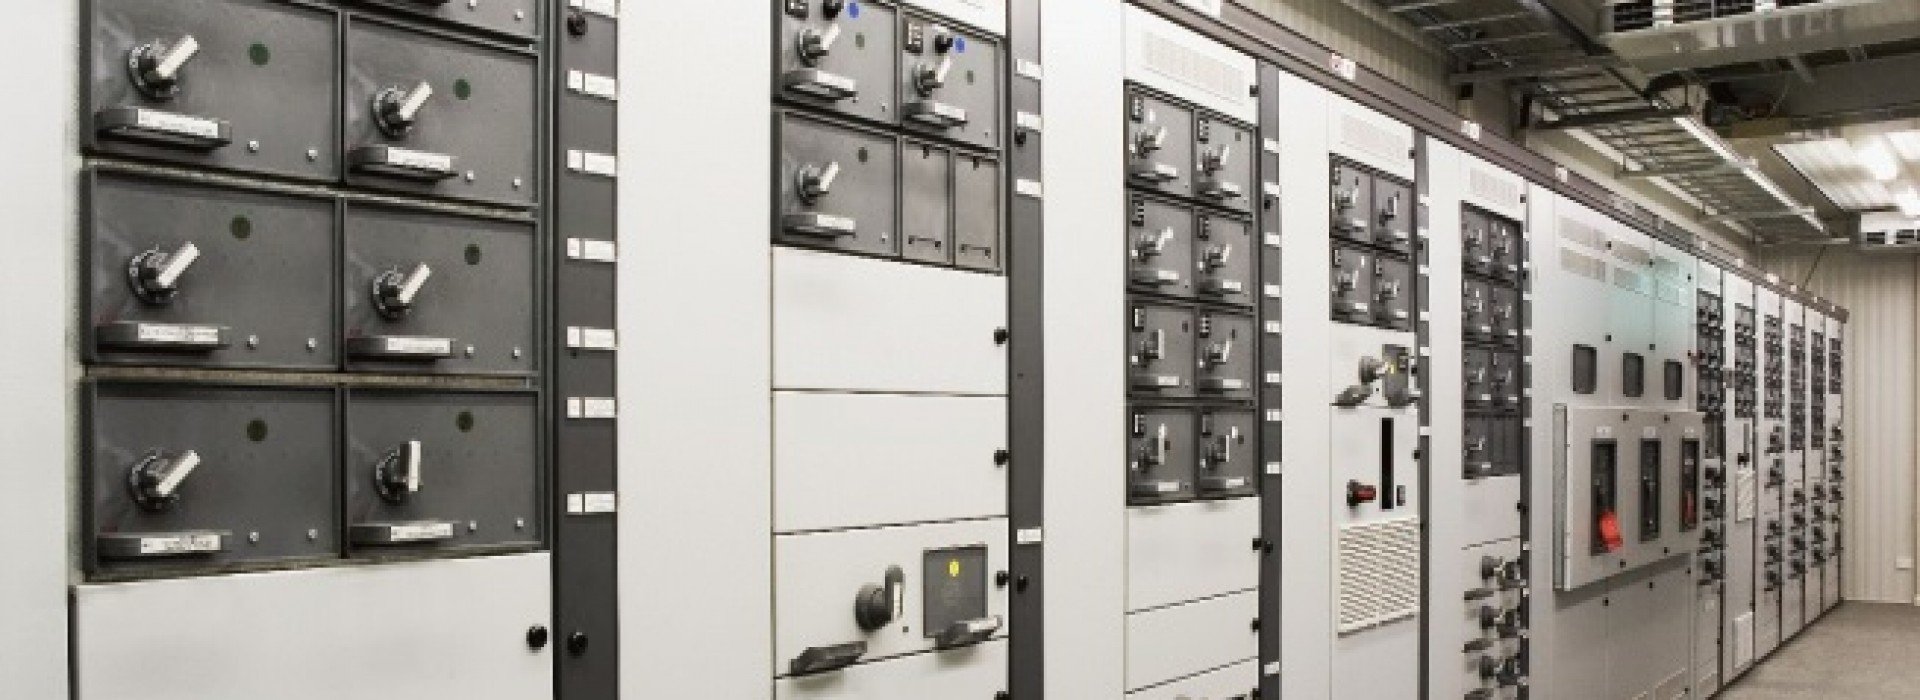 Electrical Automation Panels